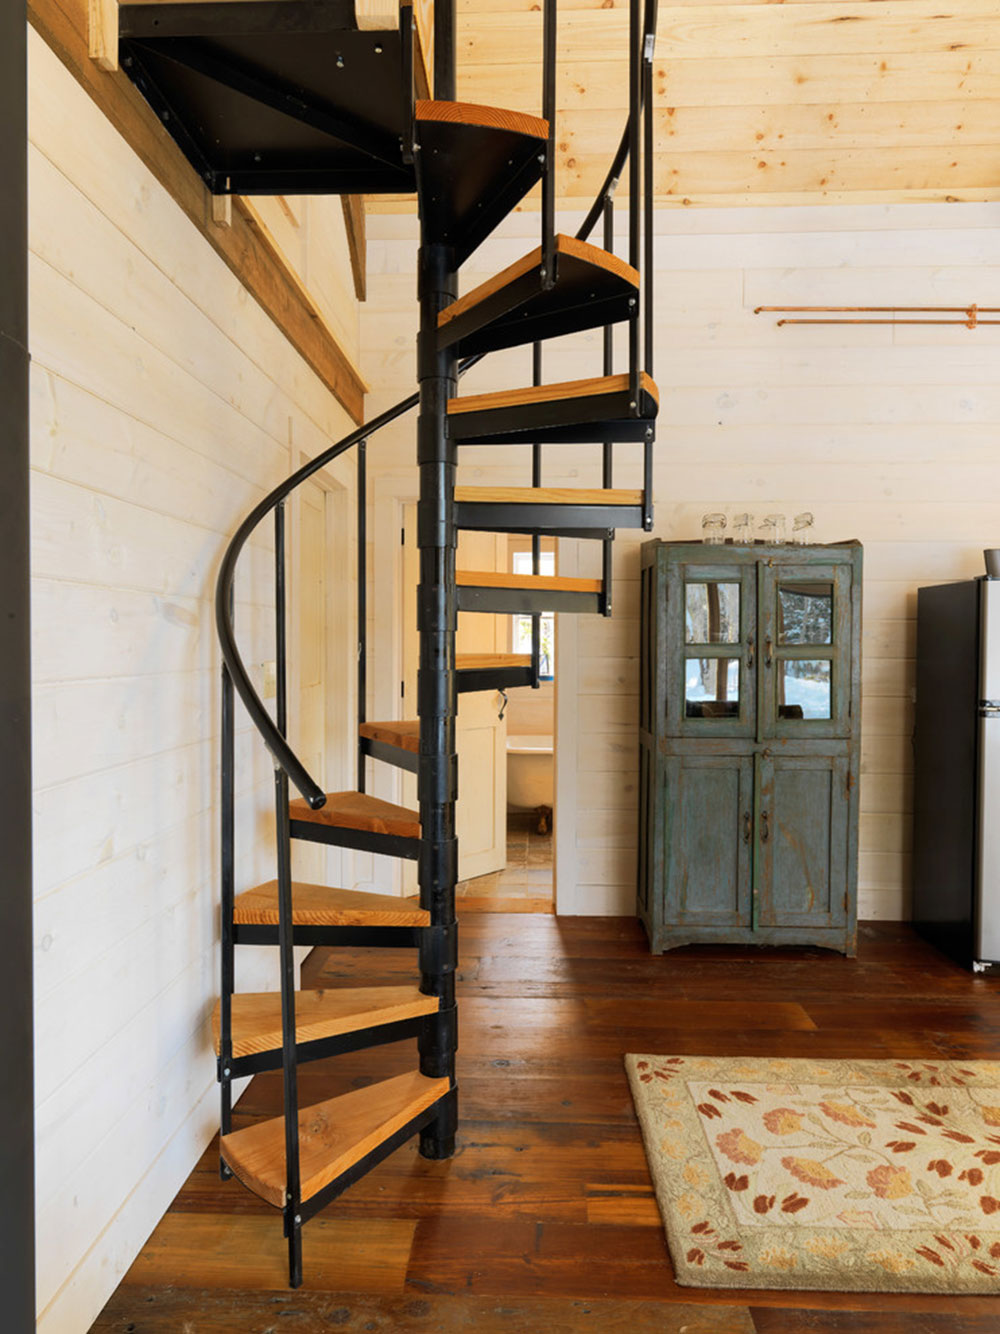 Rustic-Wood-Cabin-by-Silver-Maple-Construction-LLC Spiral Staircase: Pictures and Things You Should Know About Them